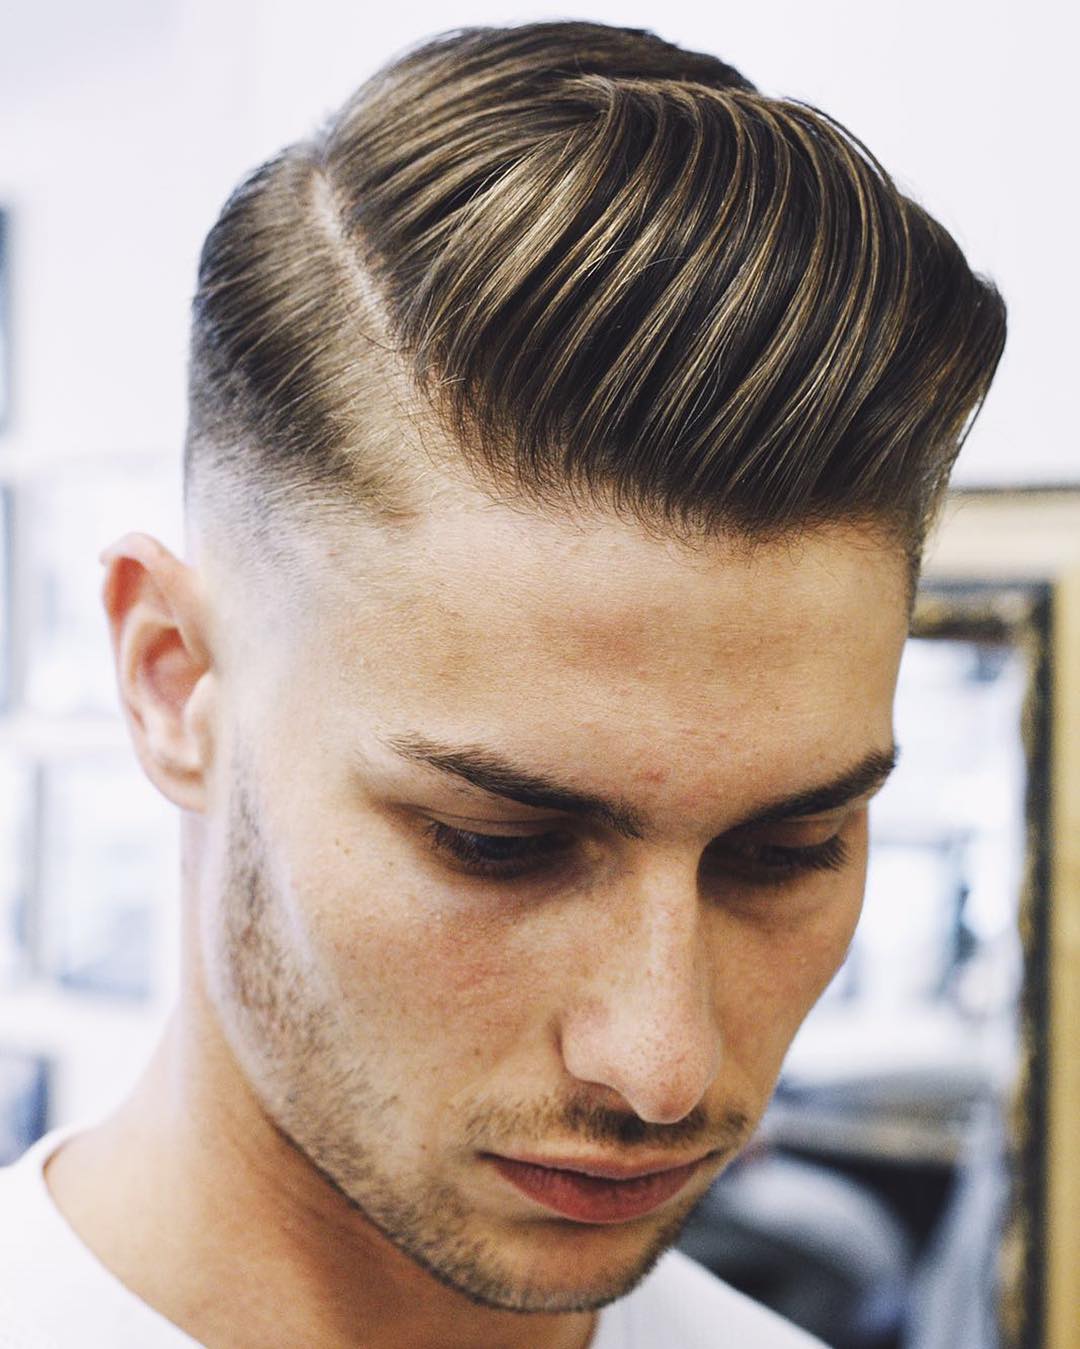 Top 100 Men S Haircuts Hairstyles For Men January 2020